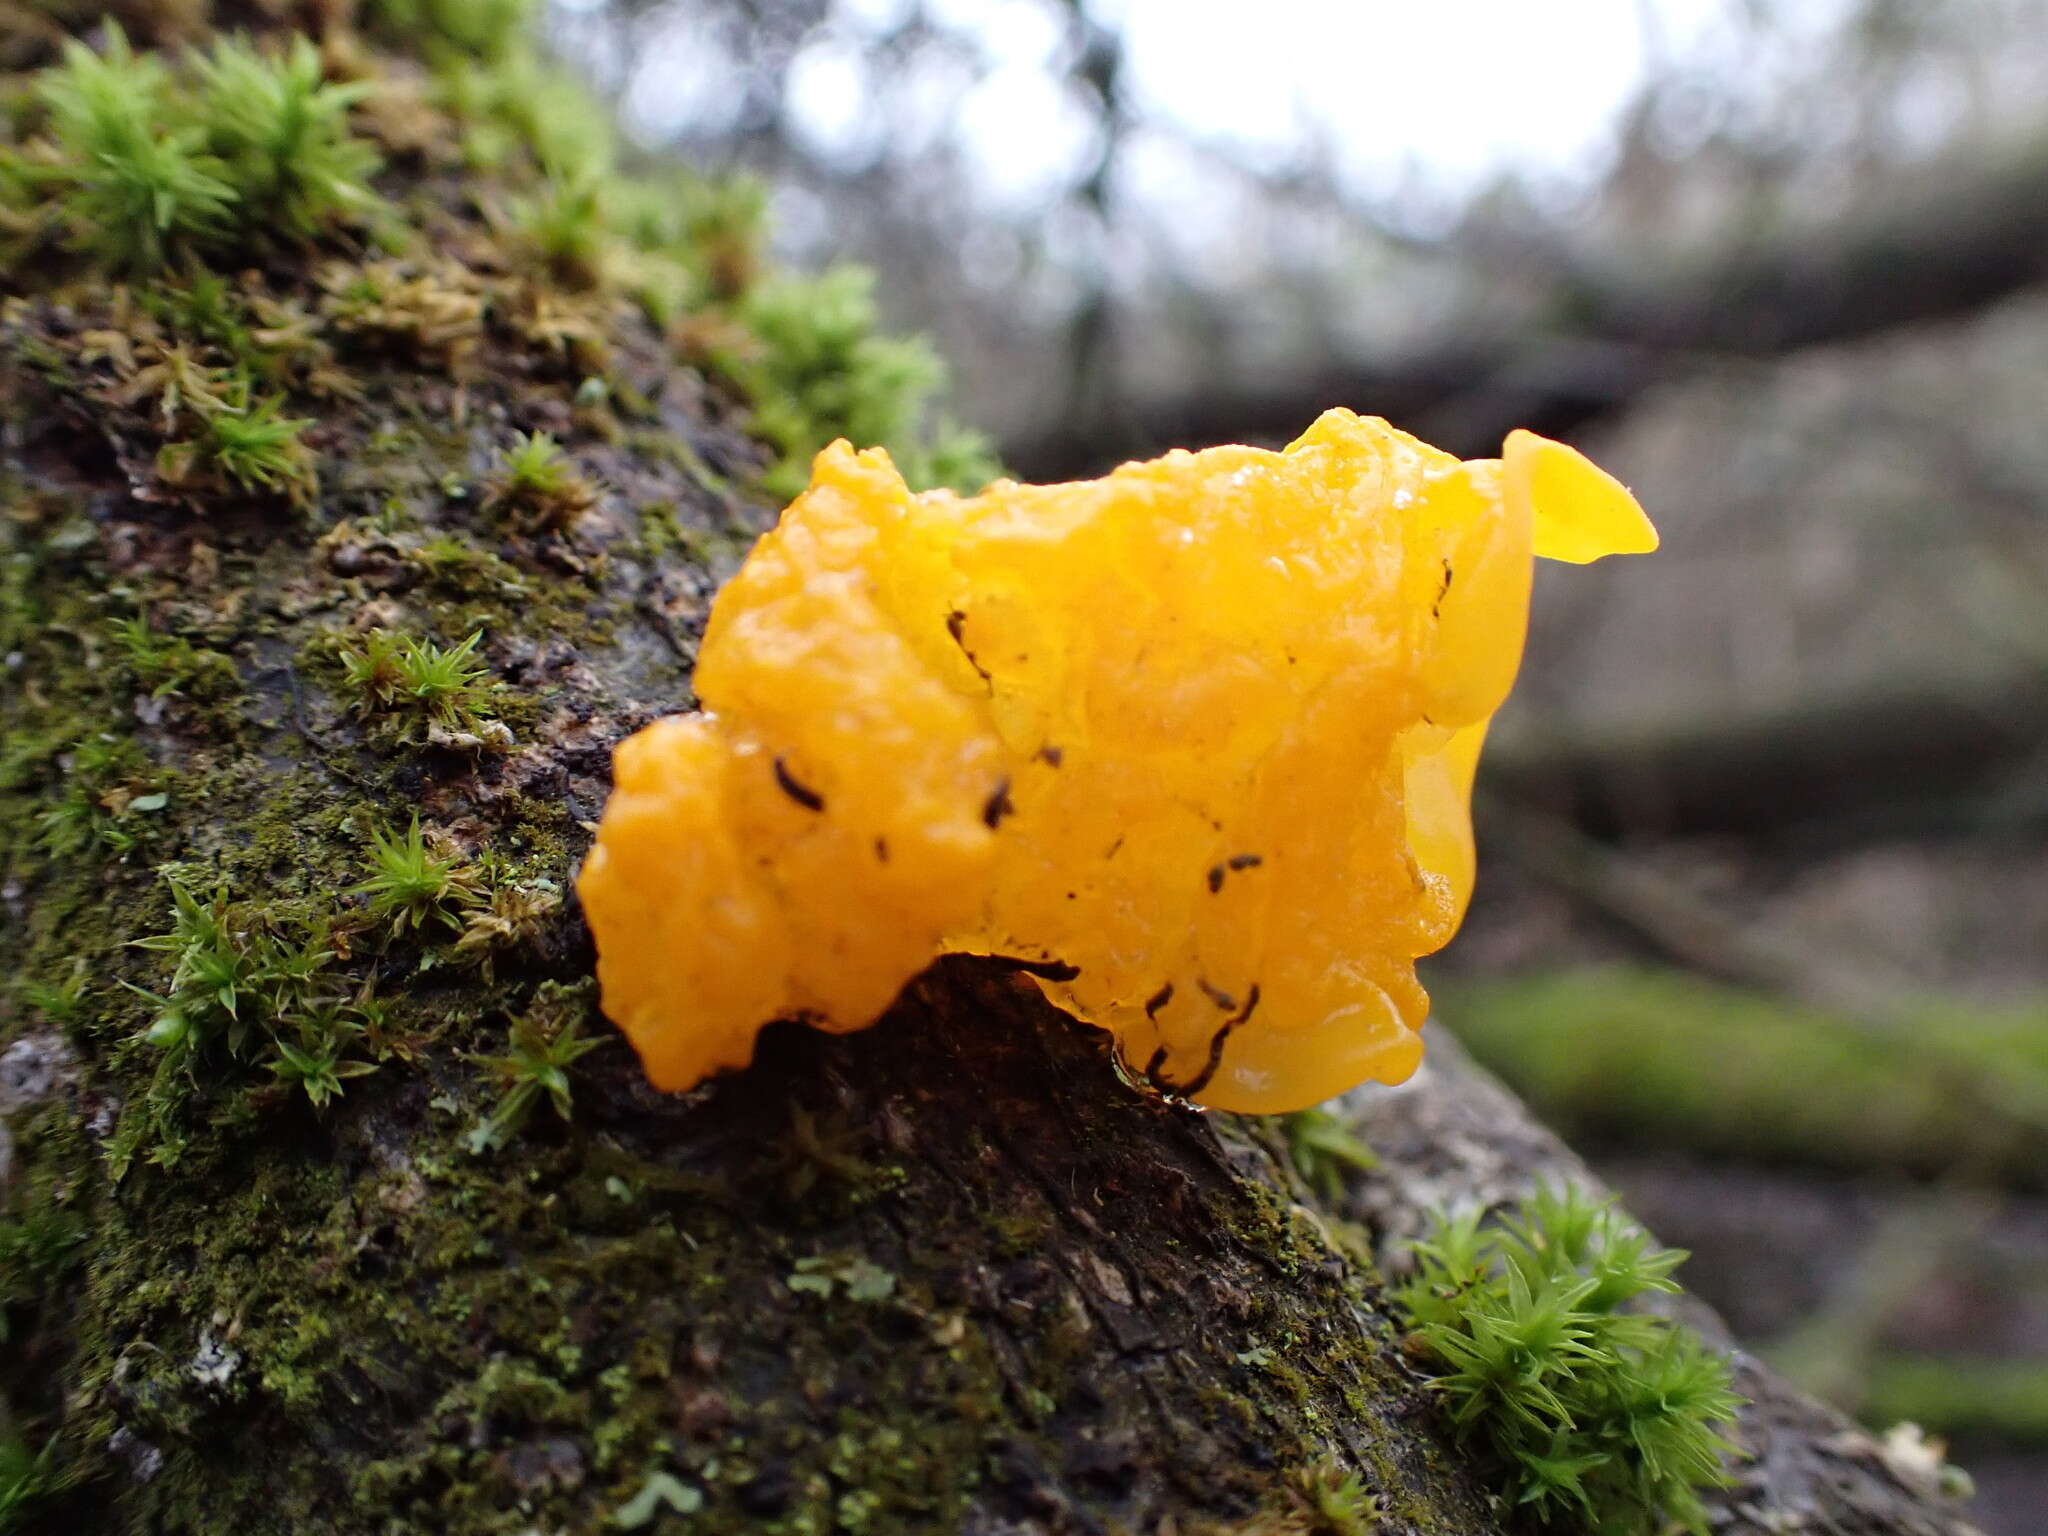 Image of Witches butter